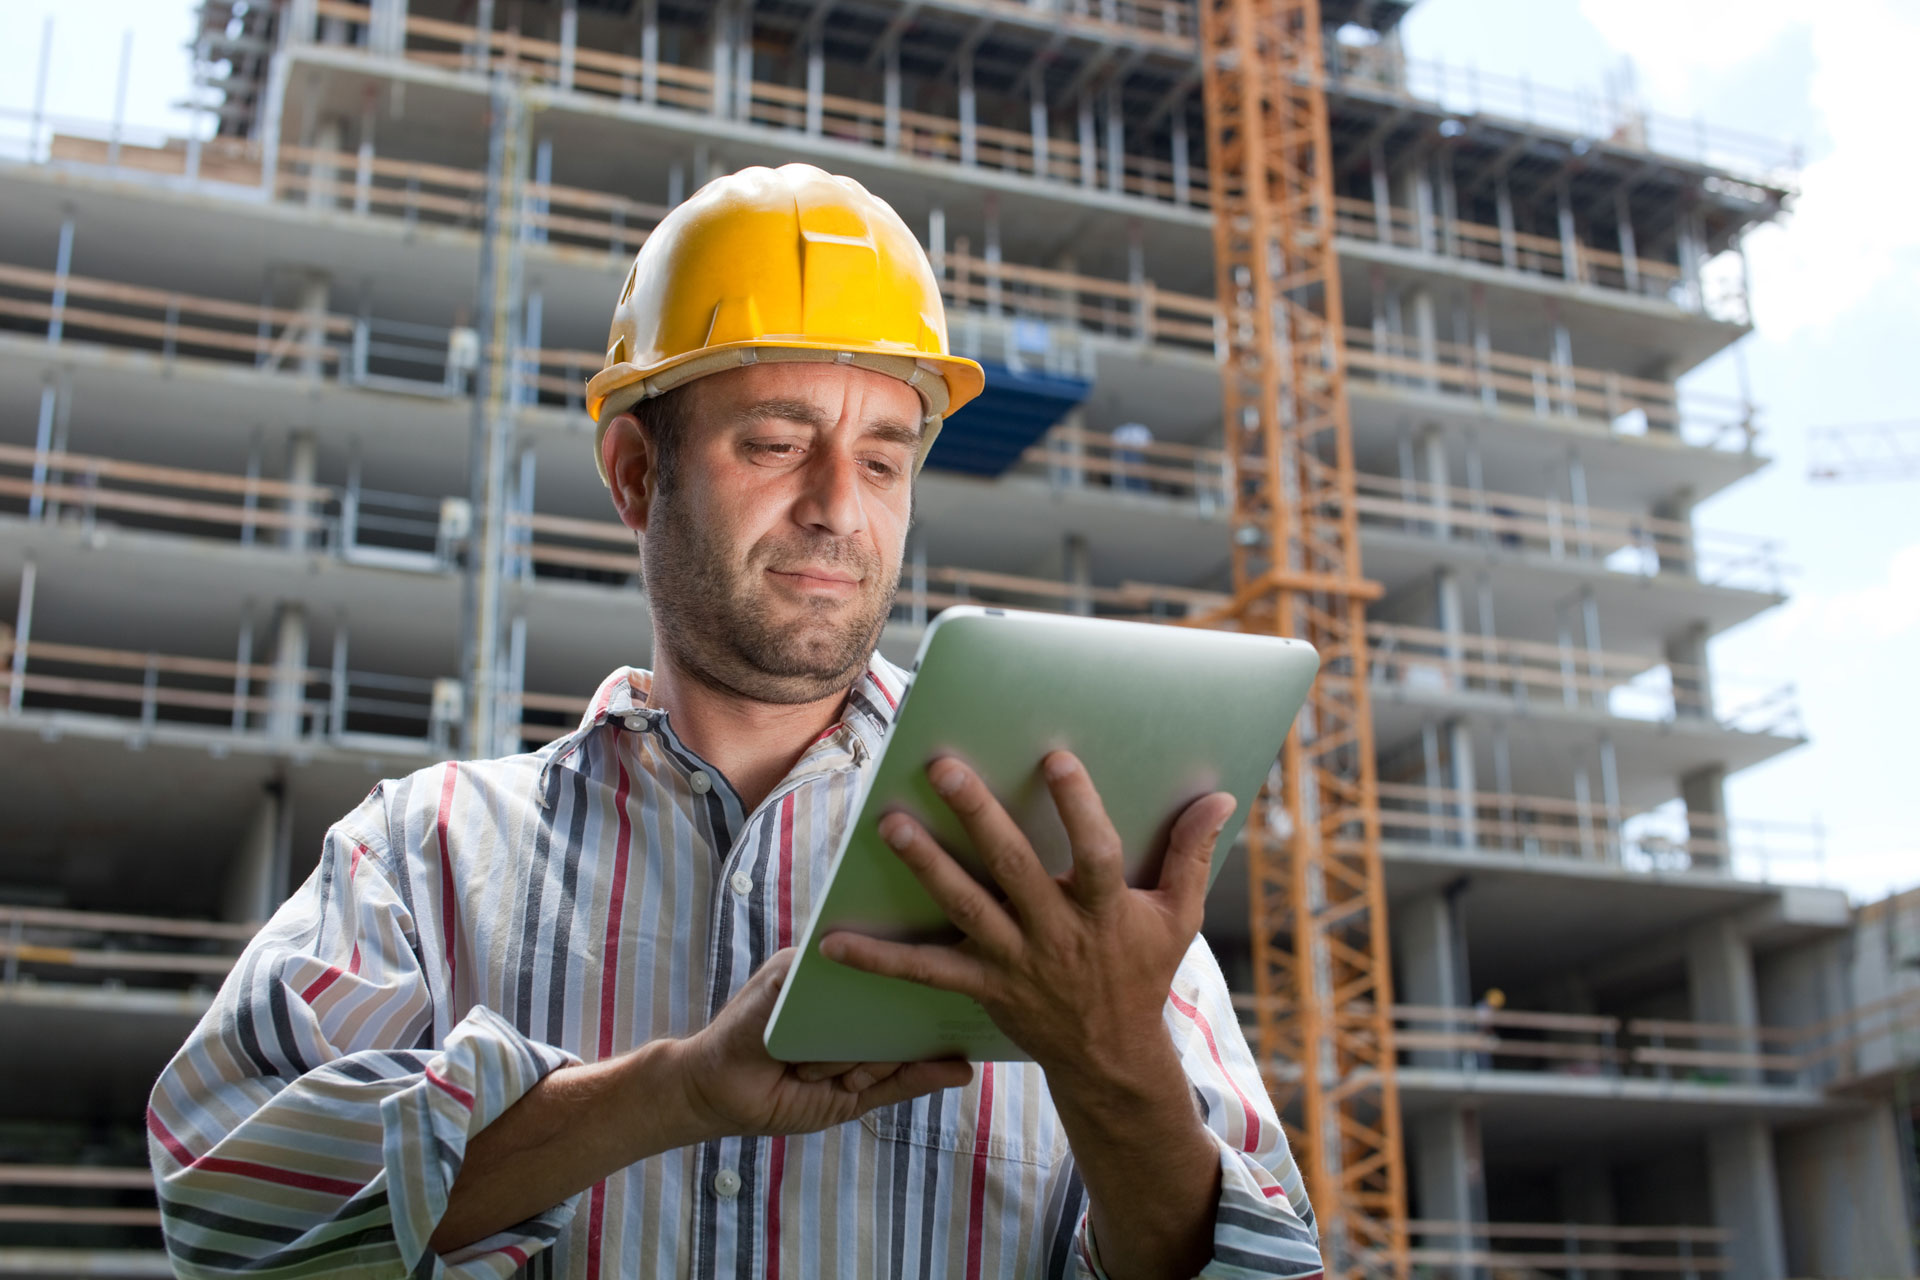 man in hardhat looking at ipad on construction site researching brisbane term loans